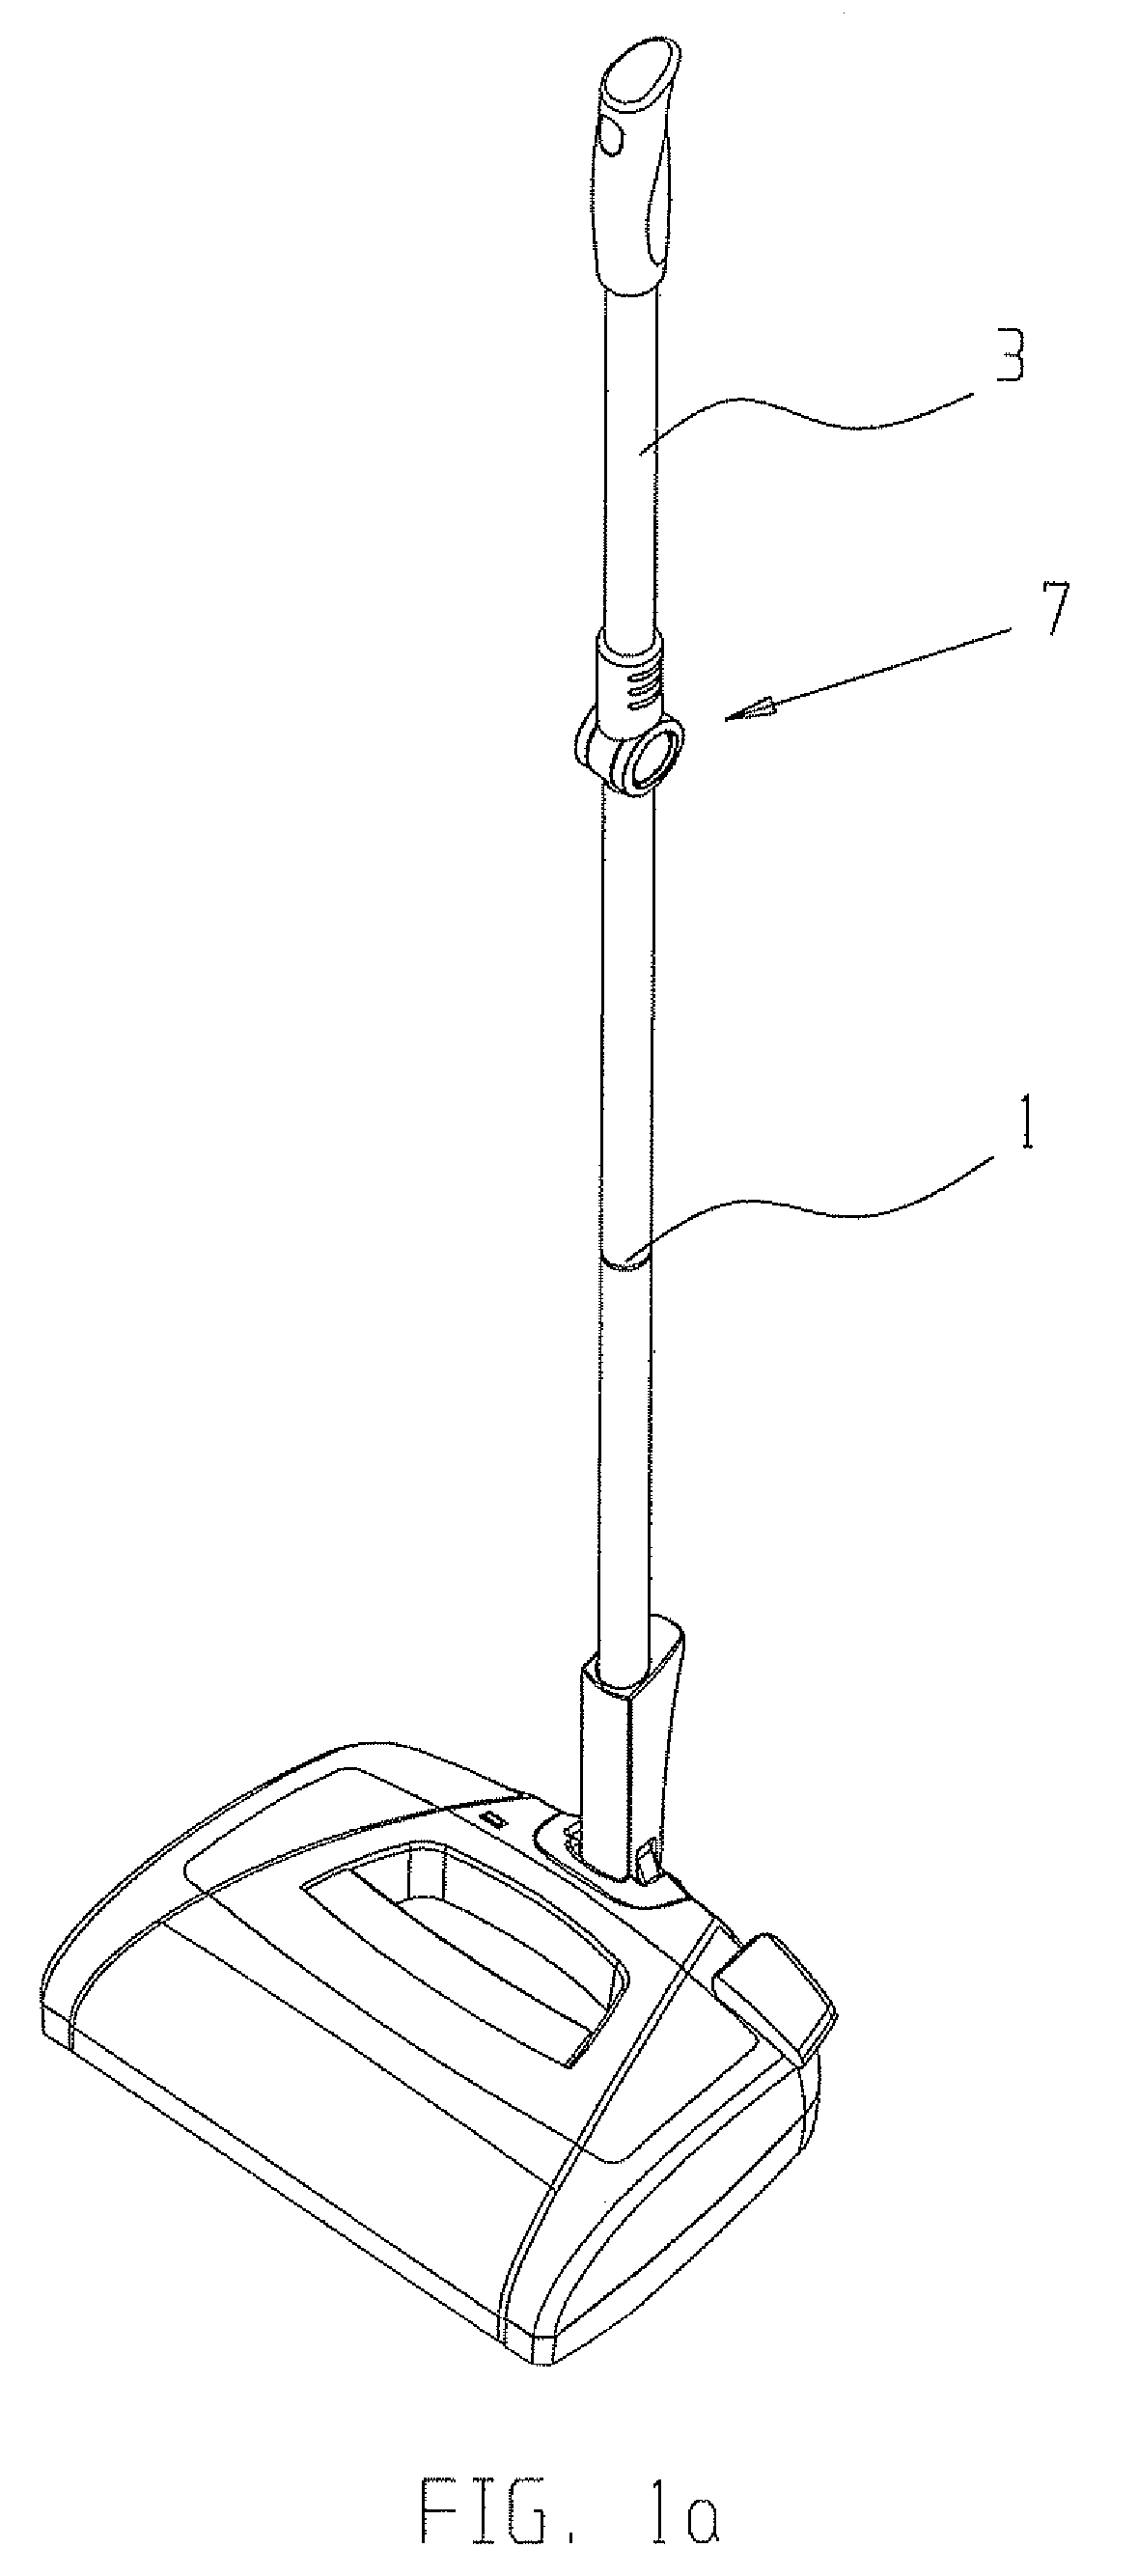 Floor cleaning apparatus with elongate handle and handle extension